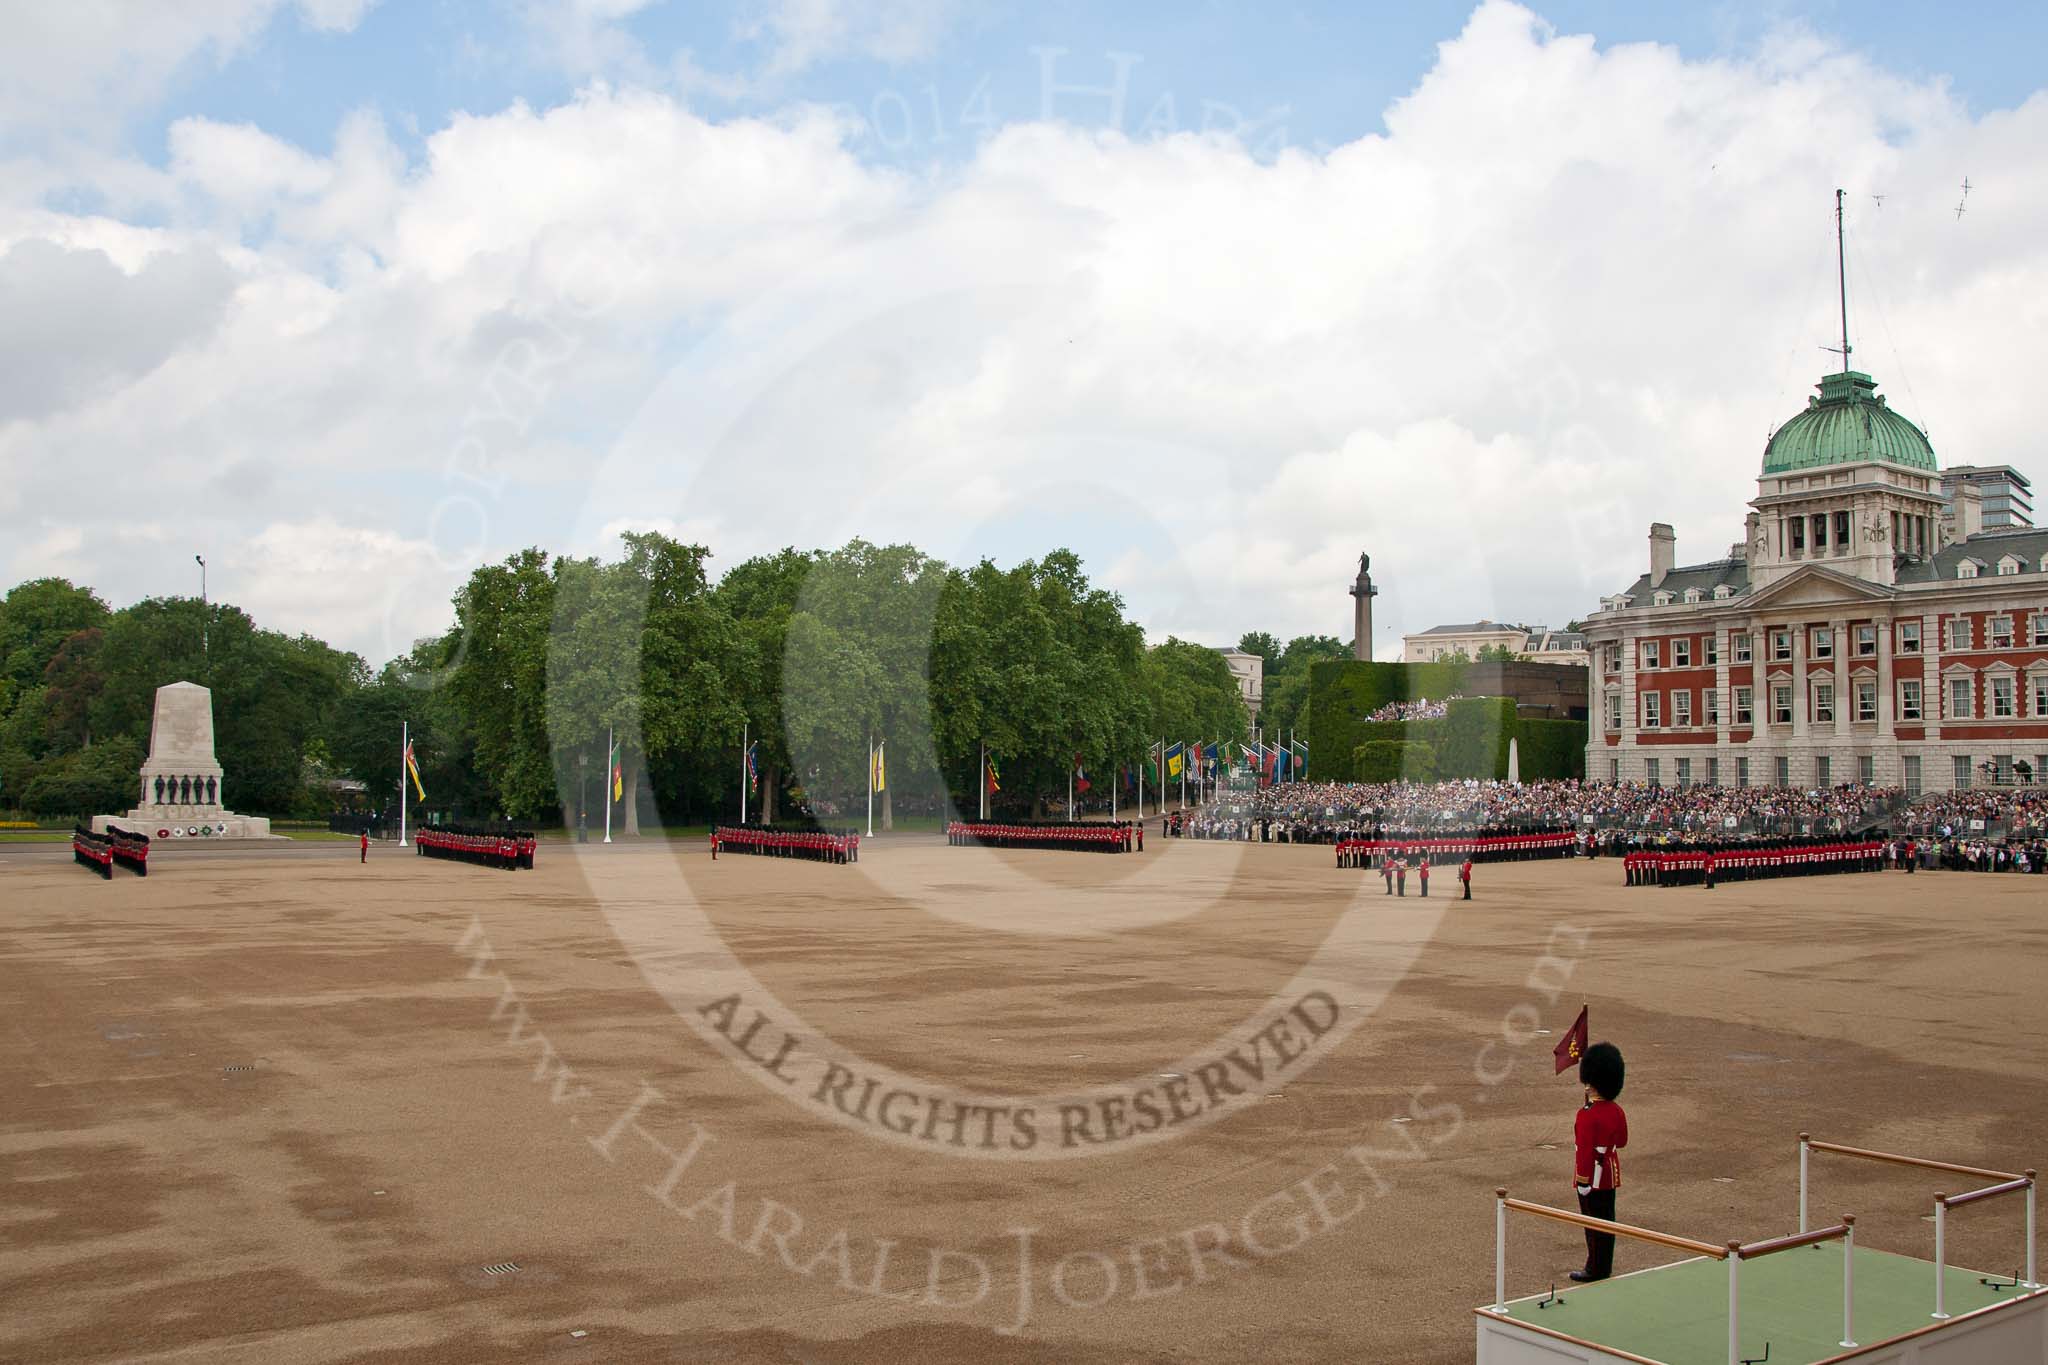 Trooping the Colour 2009: Horse Guards Parade before the event. The seven Guards are in position. The saluting base in the foreground will later be assembled and moved into position..
Horse Guards Parade, Westminster,
London SW1,

United Kingdom,
on 13 June 2009 at 10:33, image #63